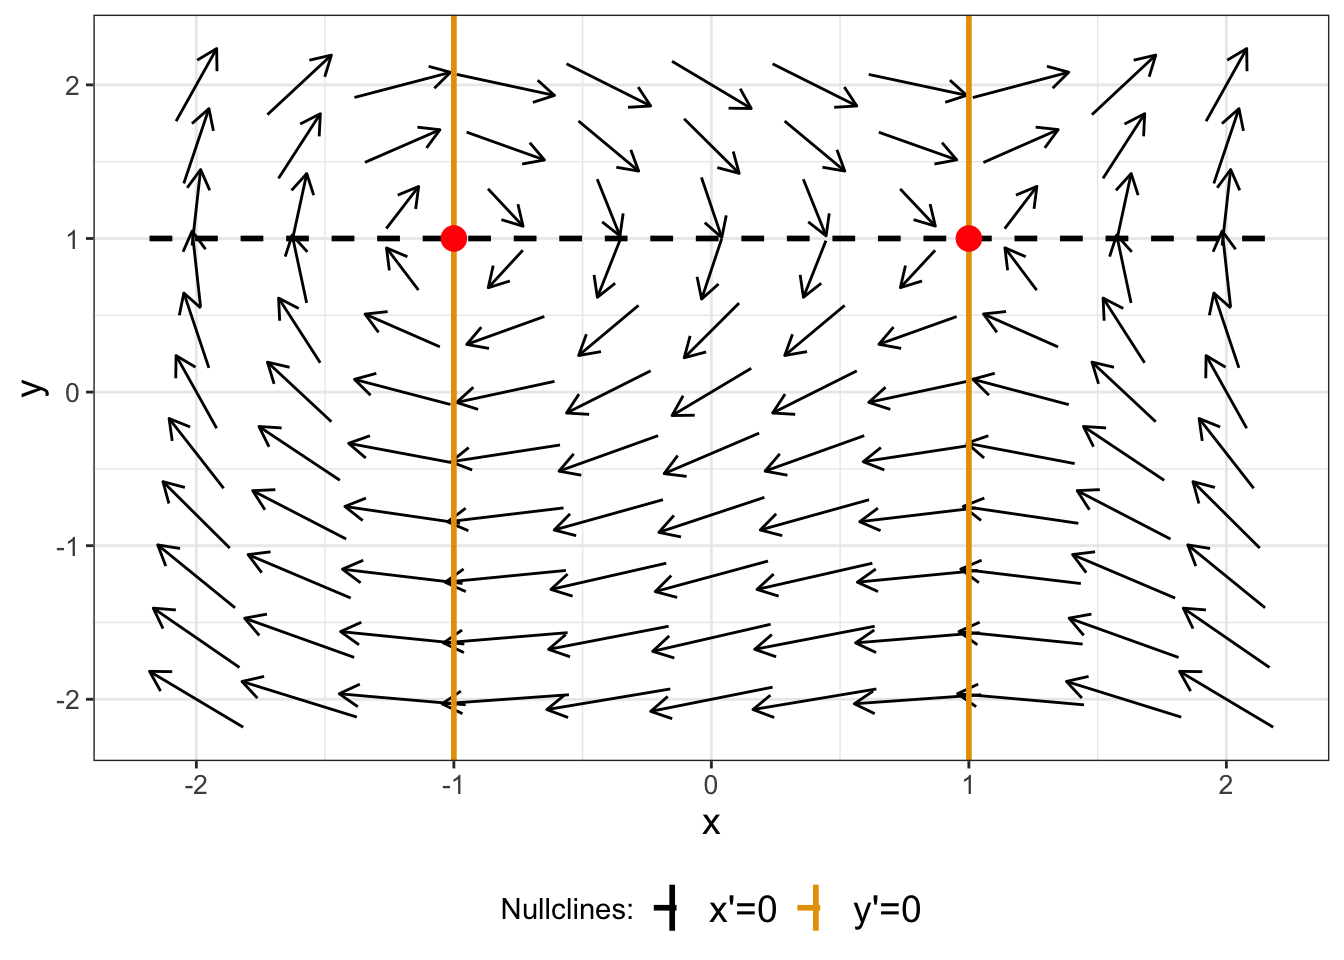 Phase plane for Equation \@ref(eq:ex1-ch16), with nullclines and equilibrium solutions shown.